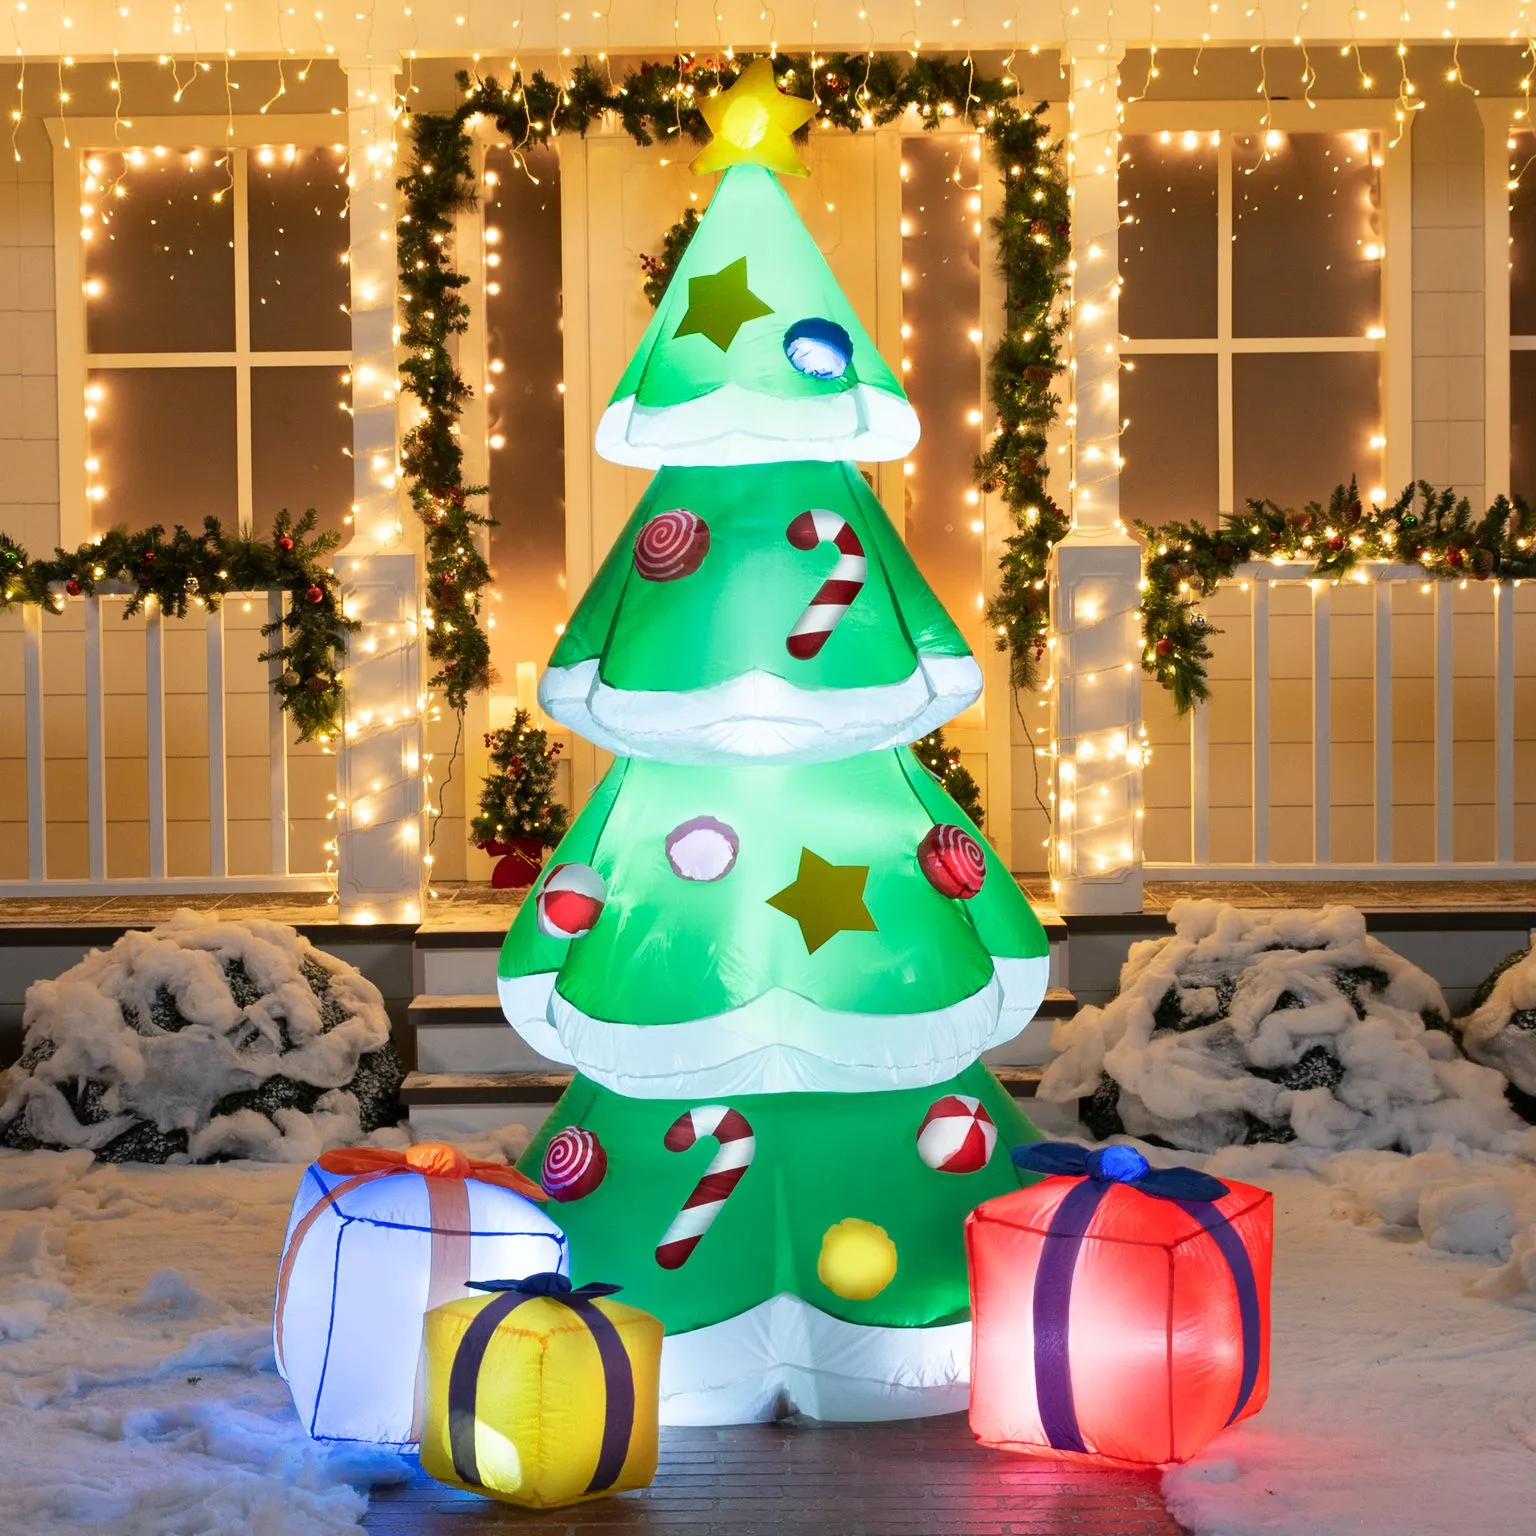 Funny Christmas Inflatables Decorating Tips: Bring Joy to Your Holiday